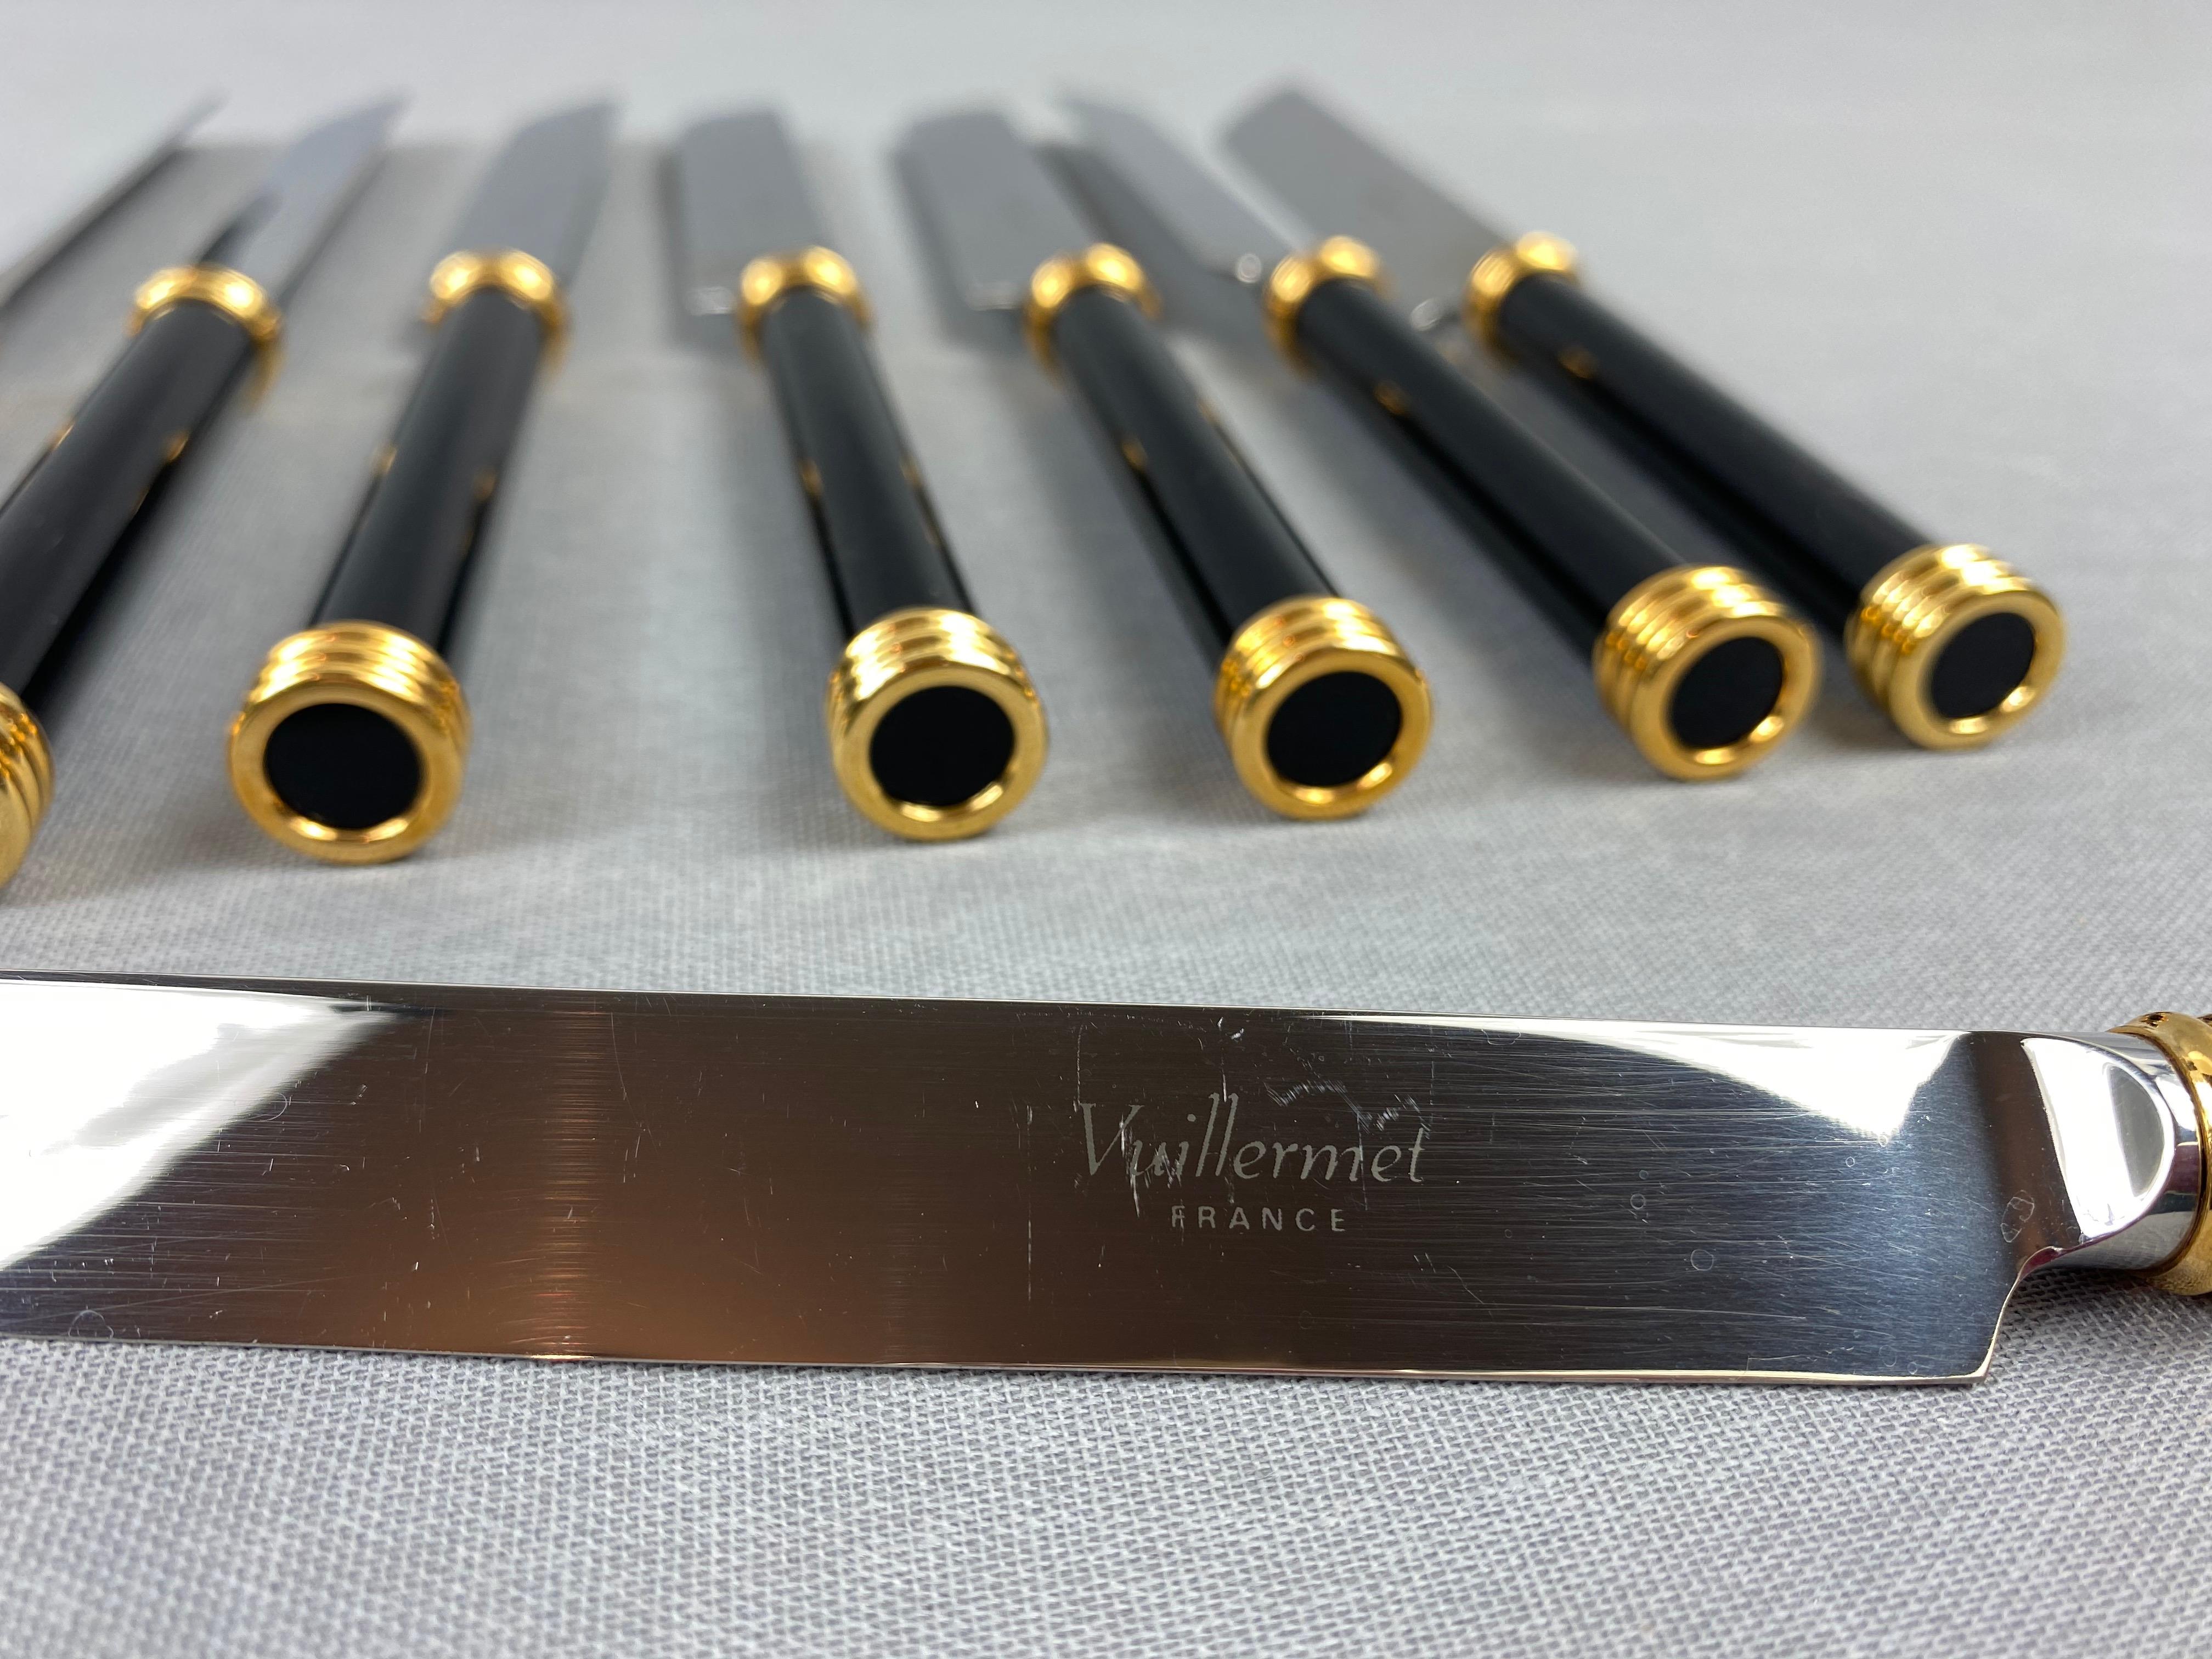 Mid-20th Century Large and Rare Vuillermet France Cutlery Set in Black Gold with Knife Rests 60s